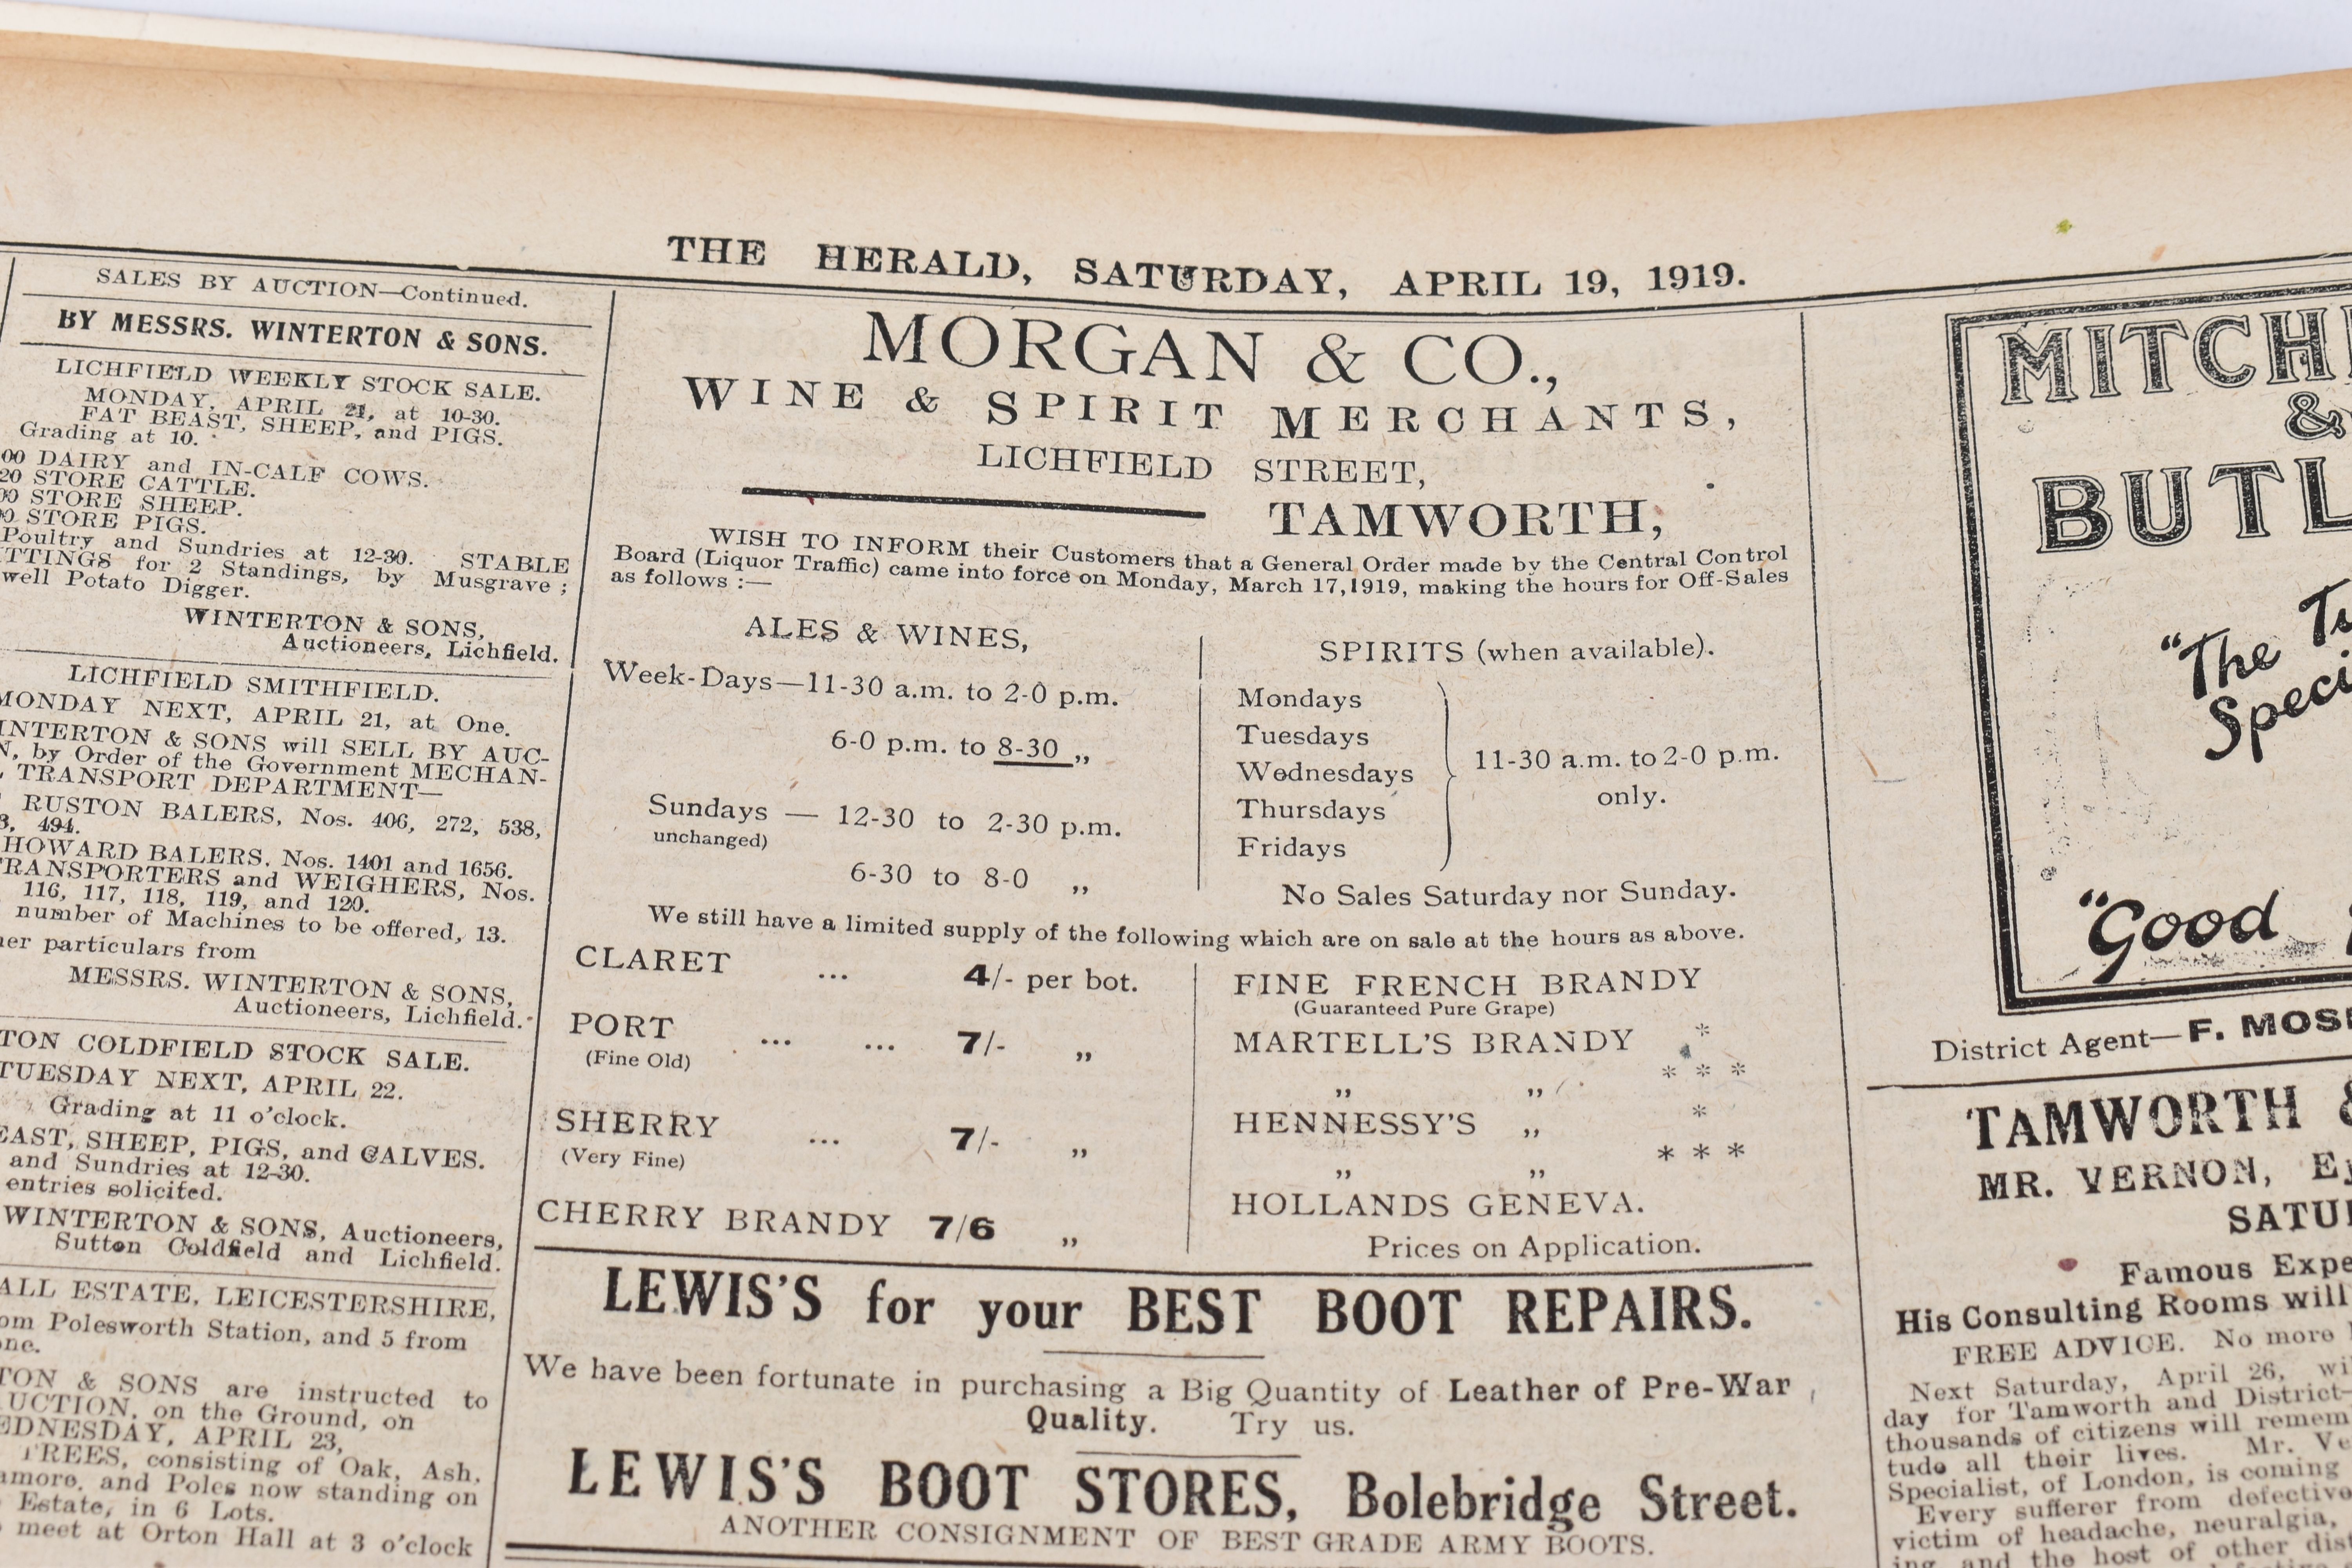 THE TAMWORTH HERALD, an Archive of the Tamworth Herald Newspaper from 1919, the newspapers are bound - Image 6 of 9